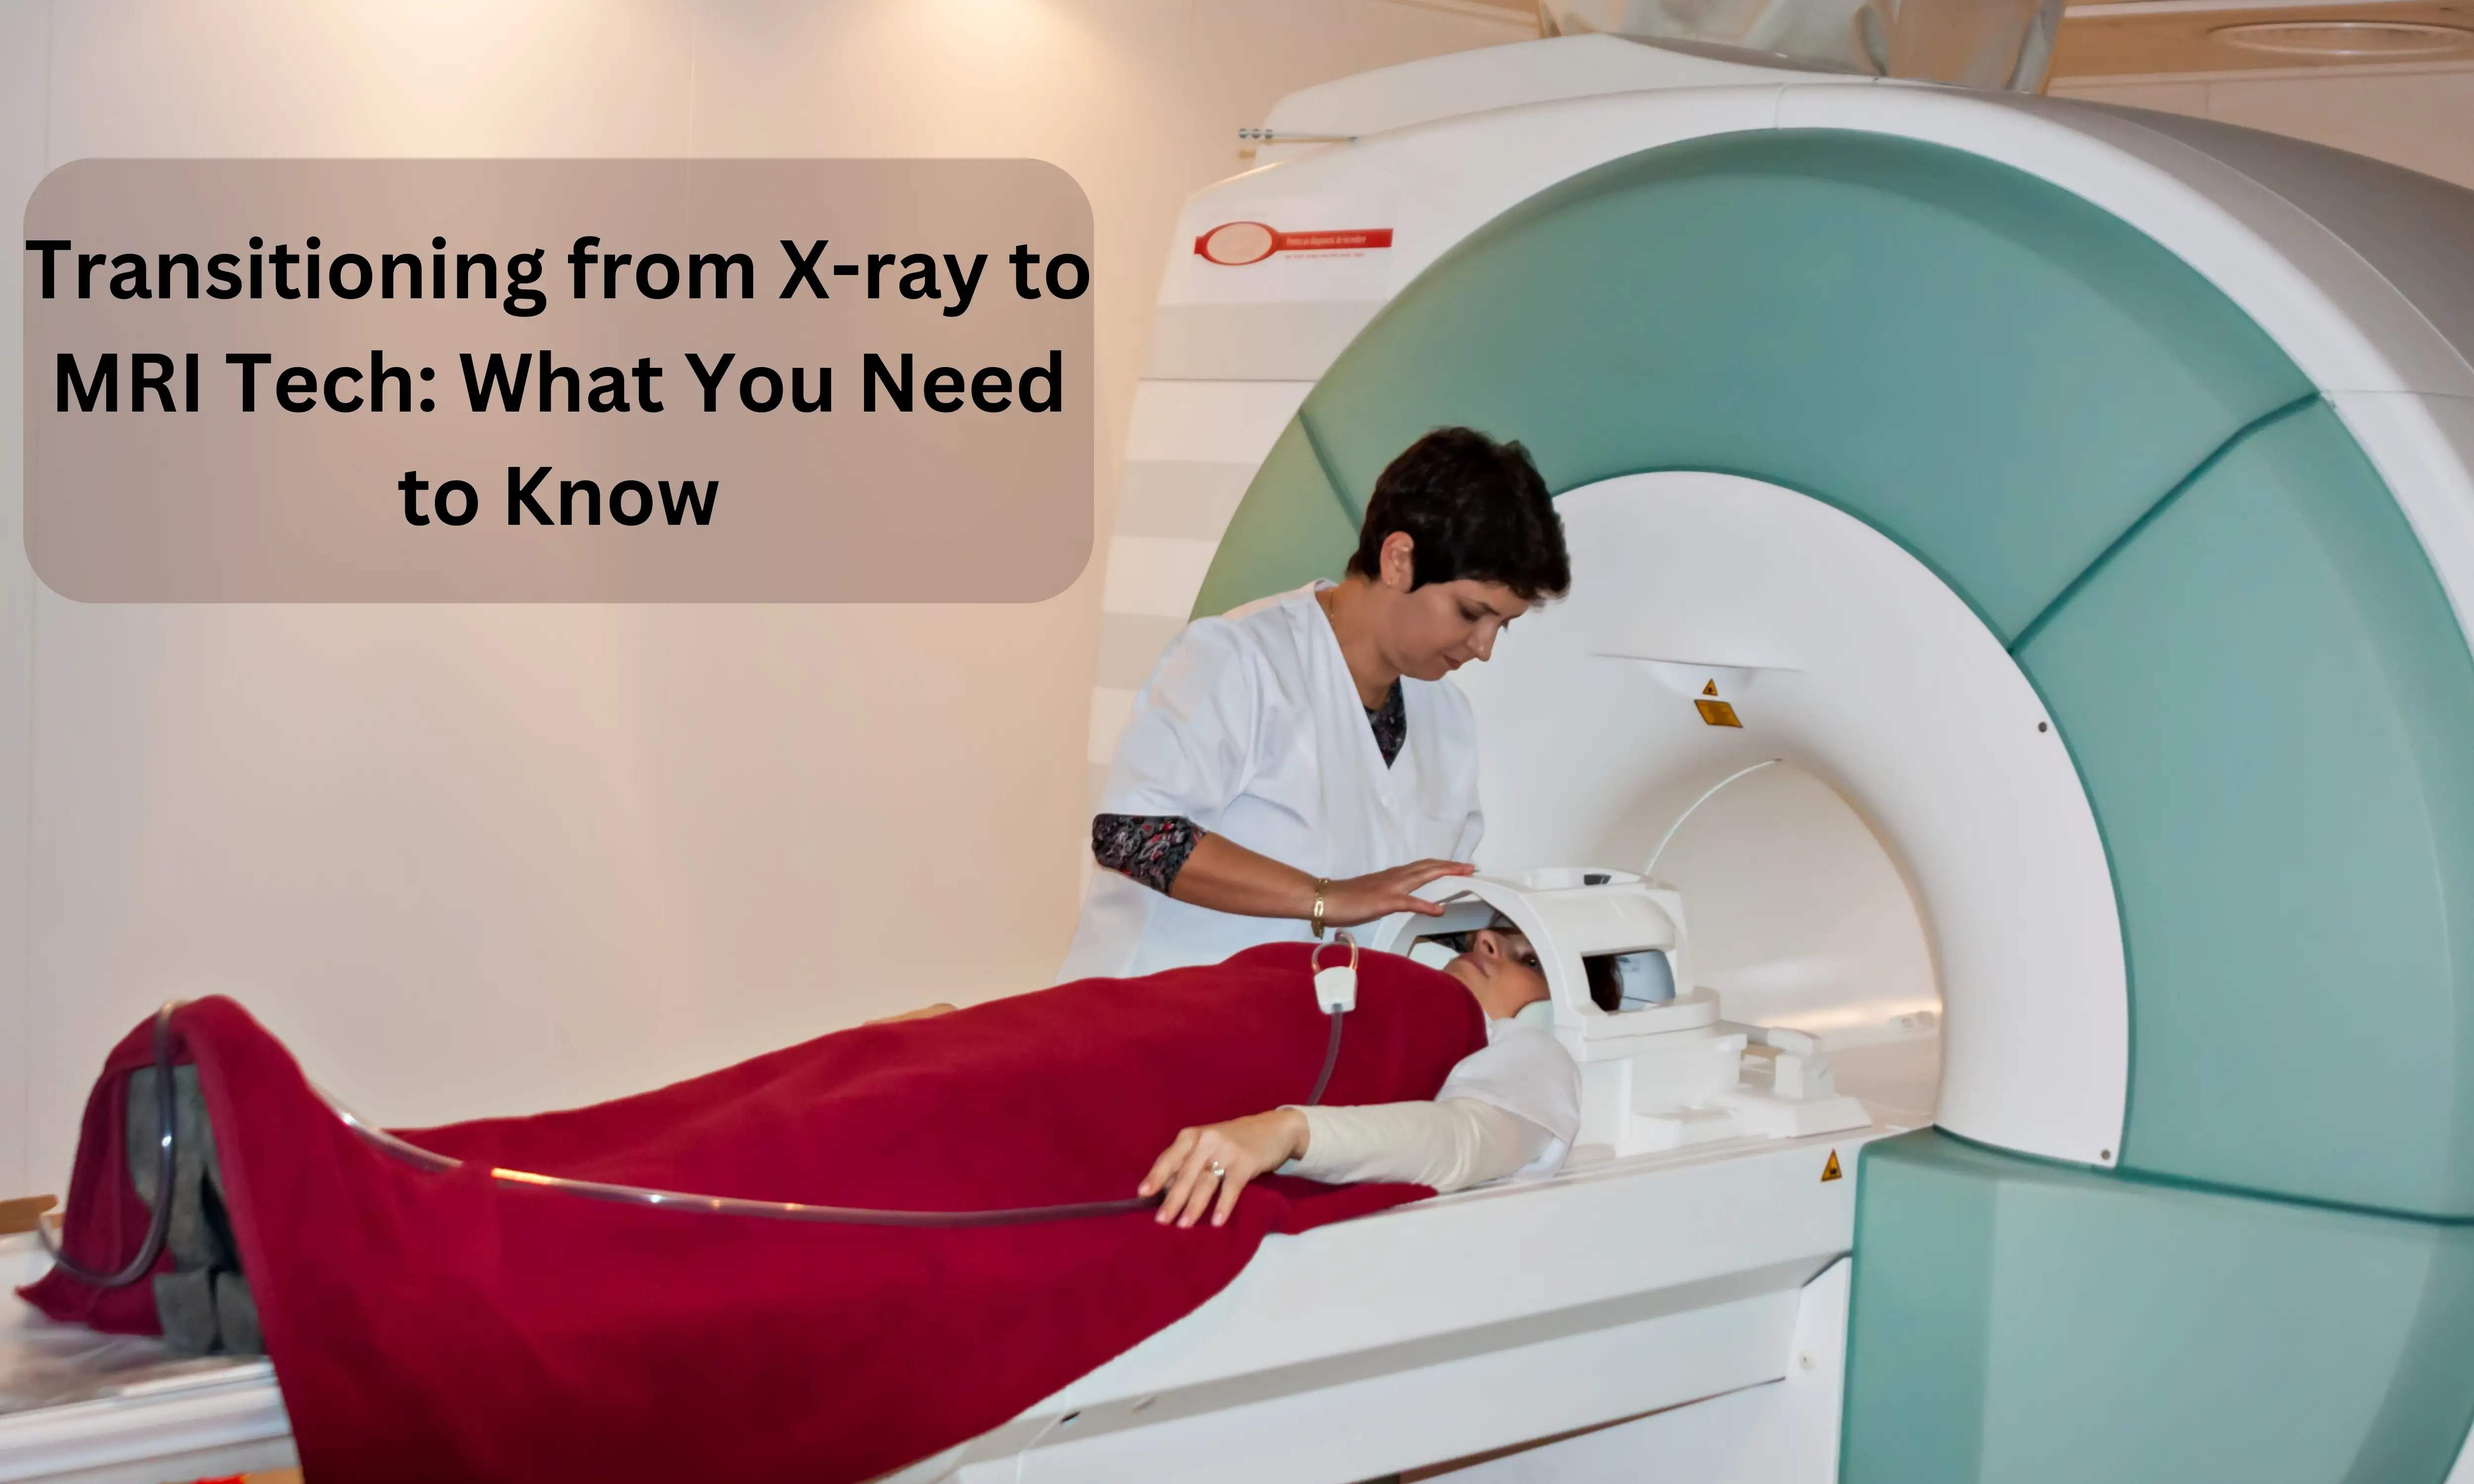 Transitioning from X-ray to MRI Tech: What You Need to Know